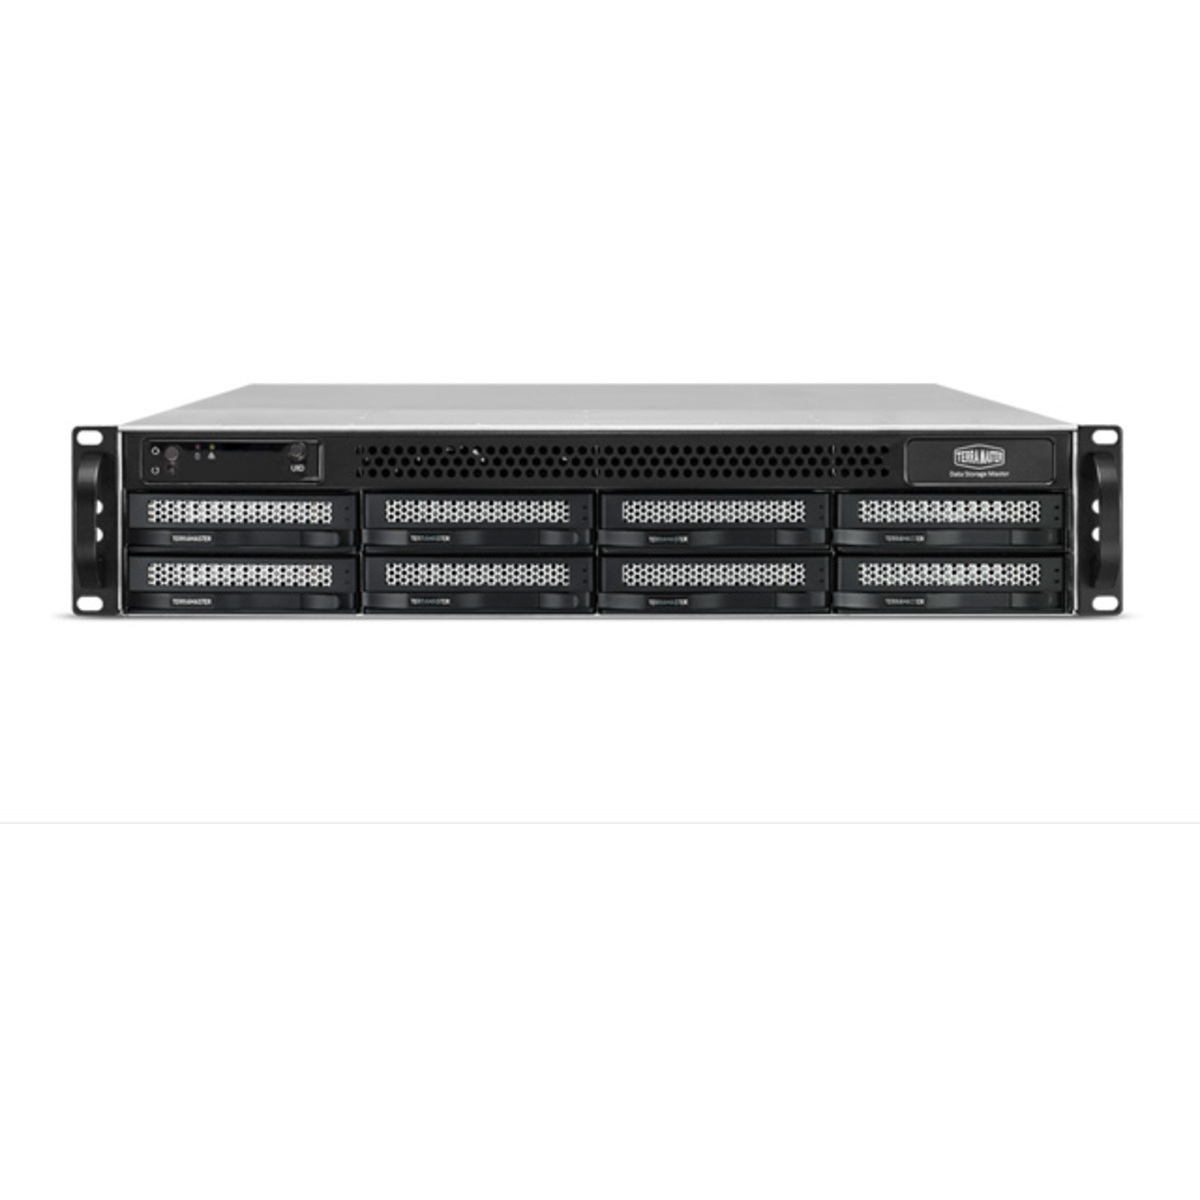 TerraMaster U8-423 192tb 8-Bay RackMount Multimedia / Power User / Business NAS - Network Attached Storage Device 8x24tb Seagate IronWolf Pro ST24000NT002 3.5 7200rpm SATA 6Gb/s HDD NAS Class Drives Installed - Burn-In Tested - FREE RAM UPGRADE U8-423